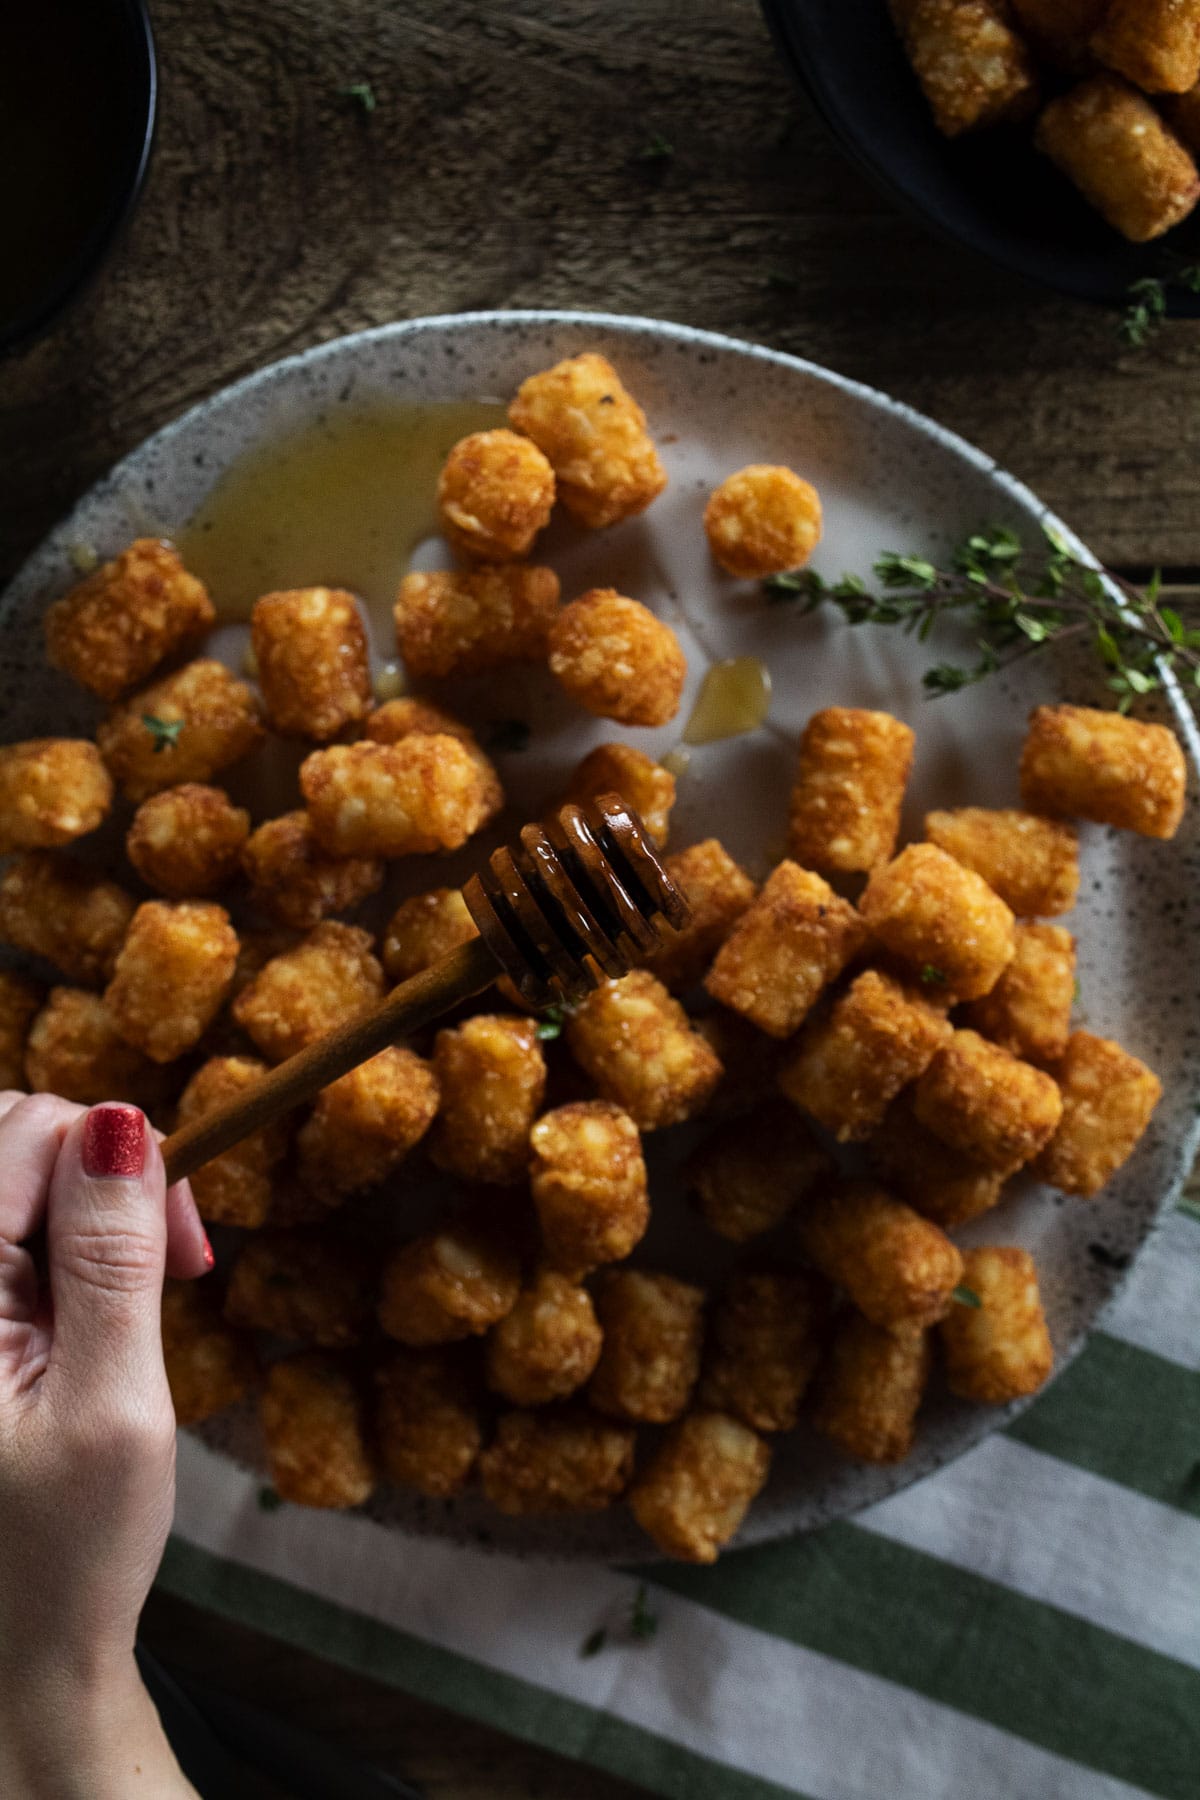 Hot honey butter tater tots. Sides for sandwiches.